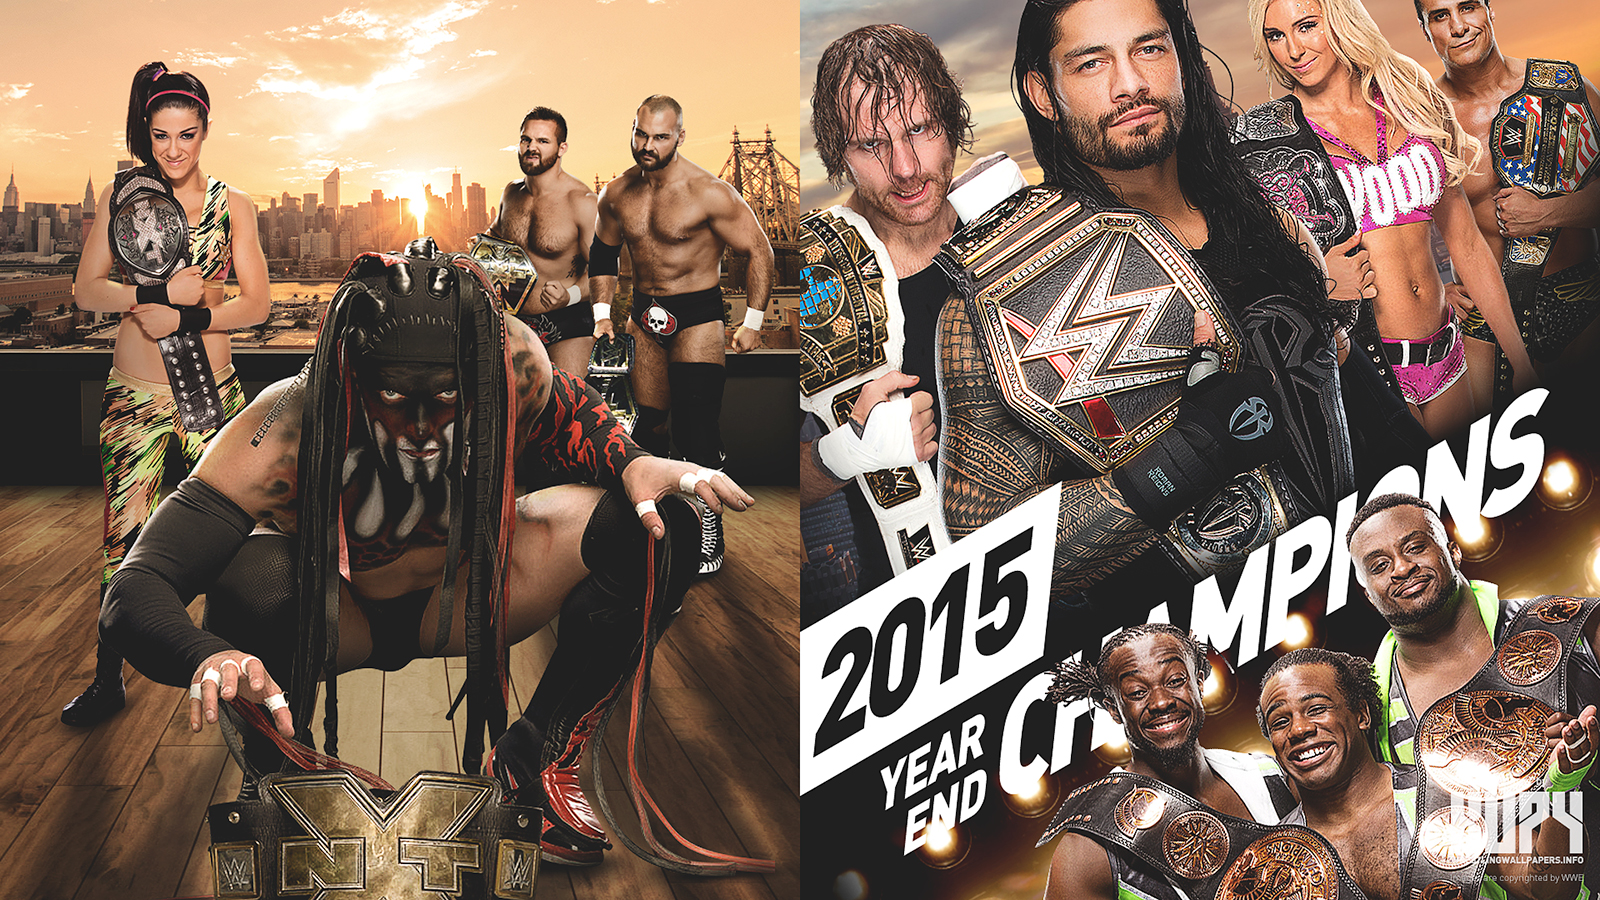 Wwe Image End Of The Year Champions HD Wallpaper And Background